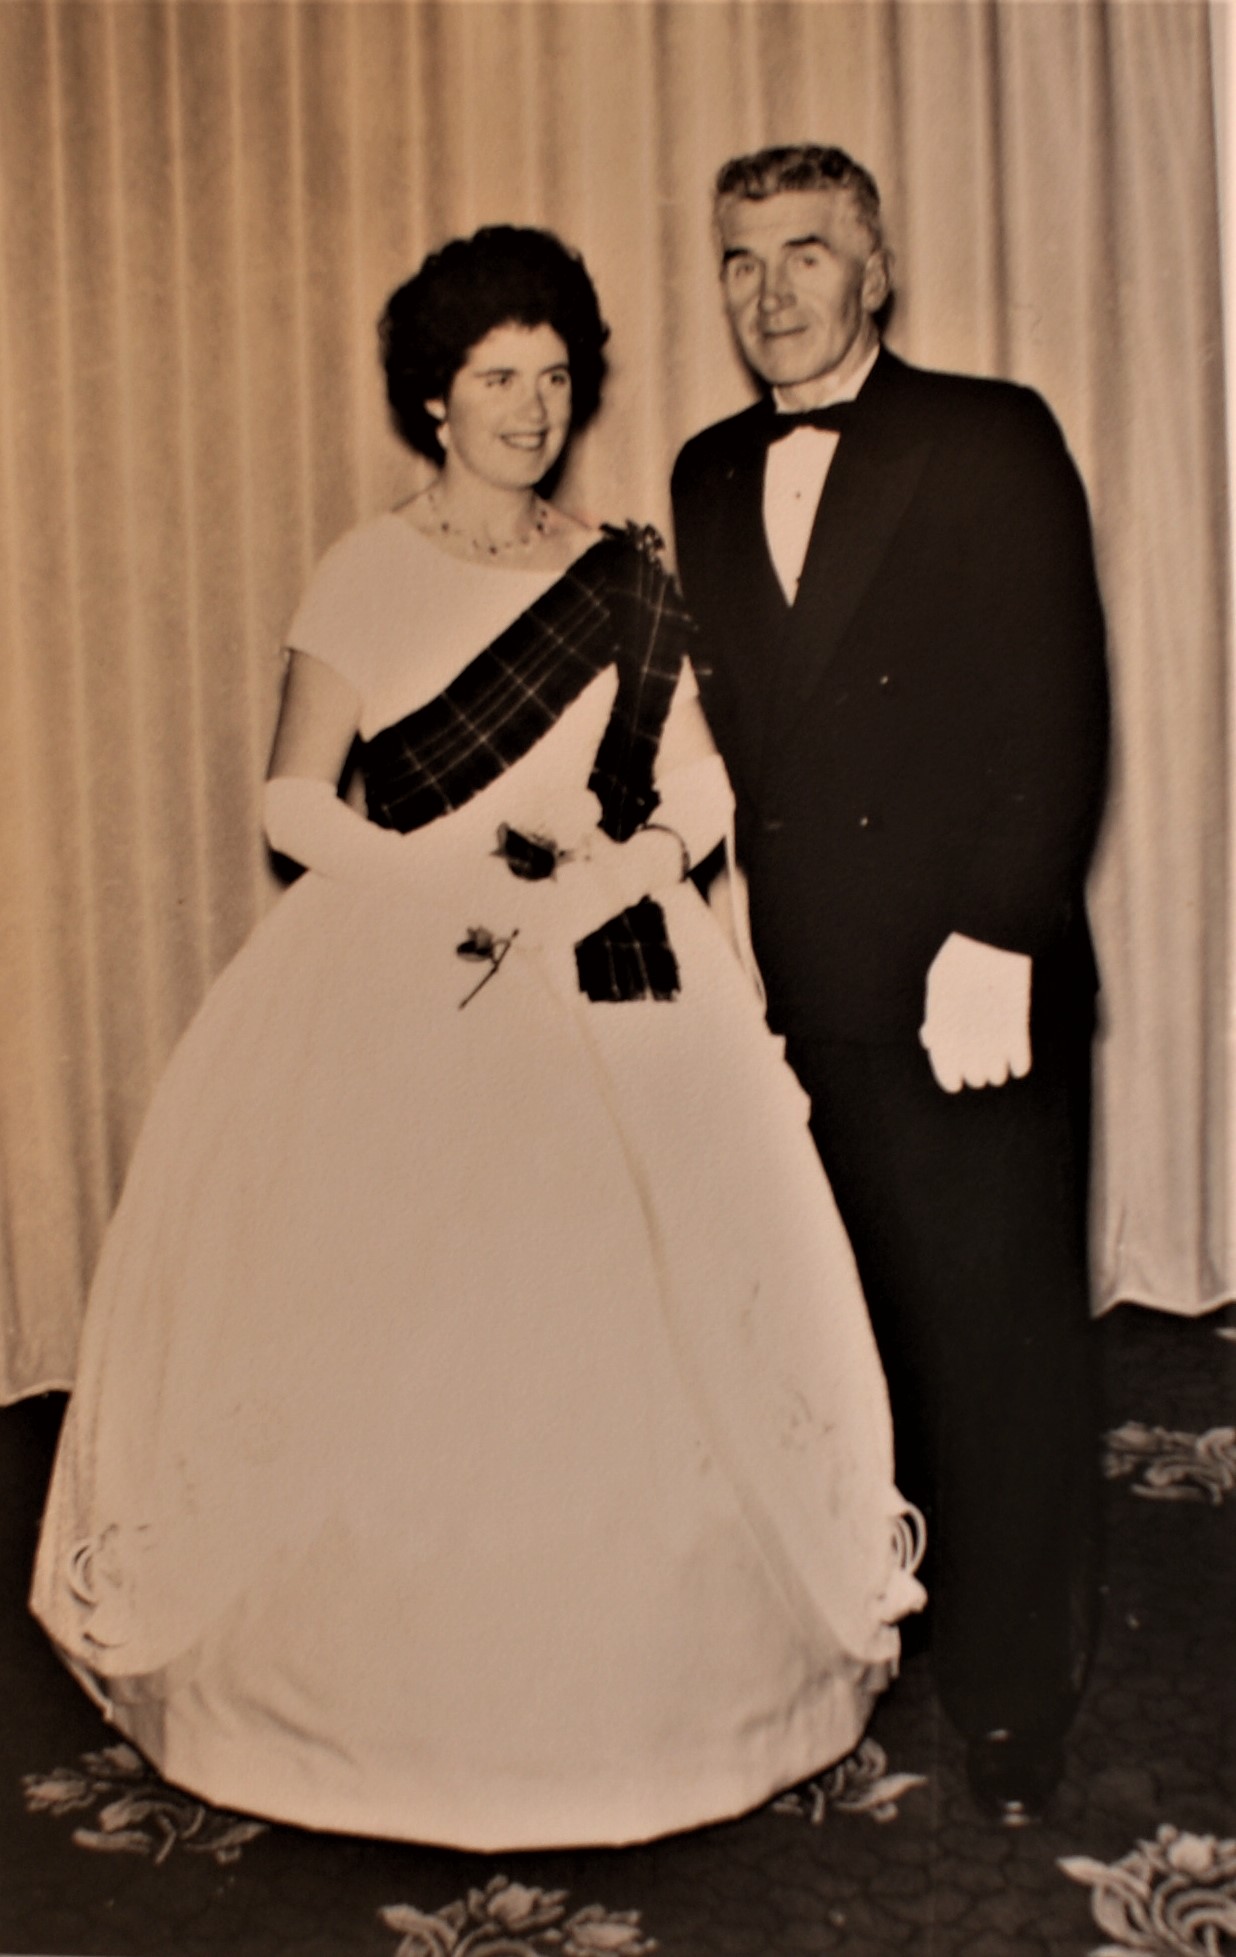 Debutante Lesley dressed in full length white gown with a tartan sash and long white gloves standing beside her besuited Father